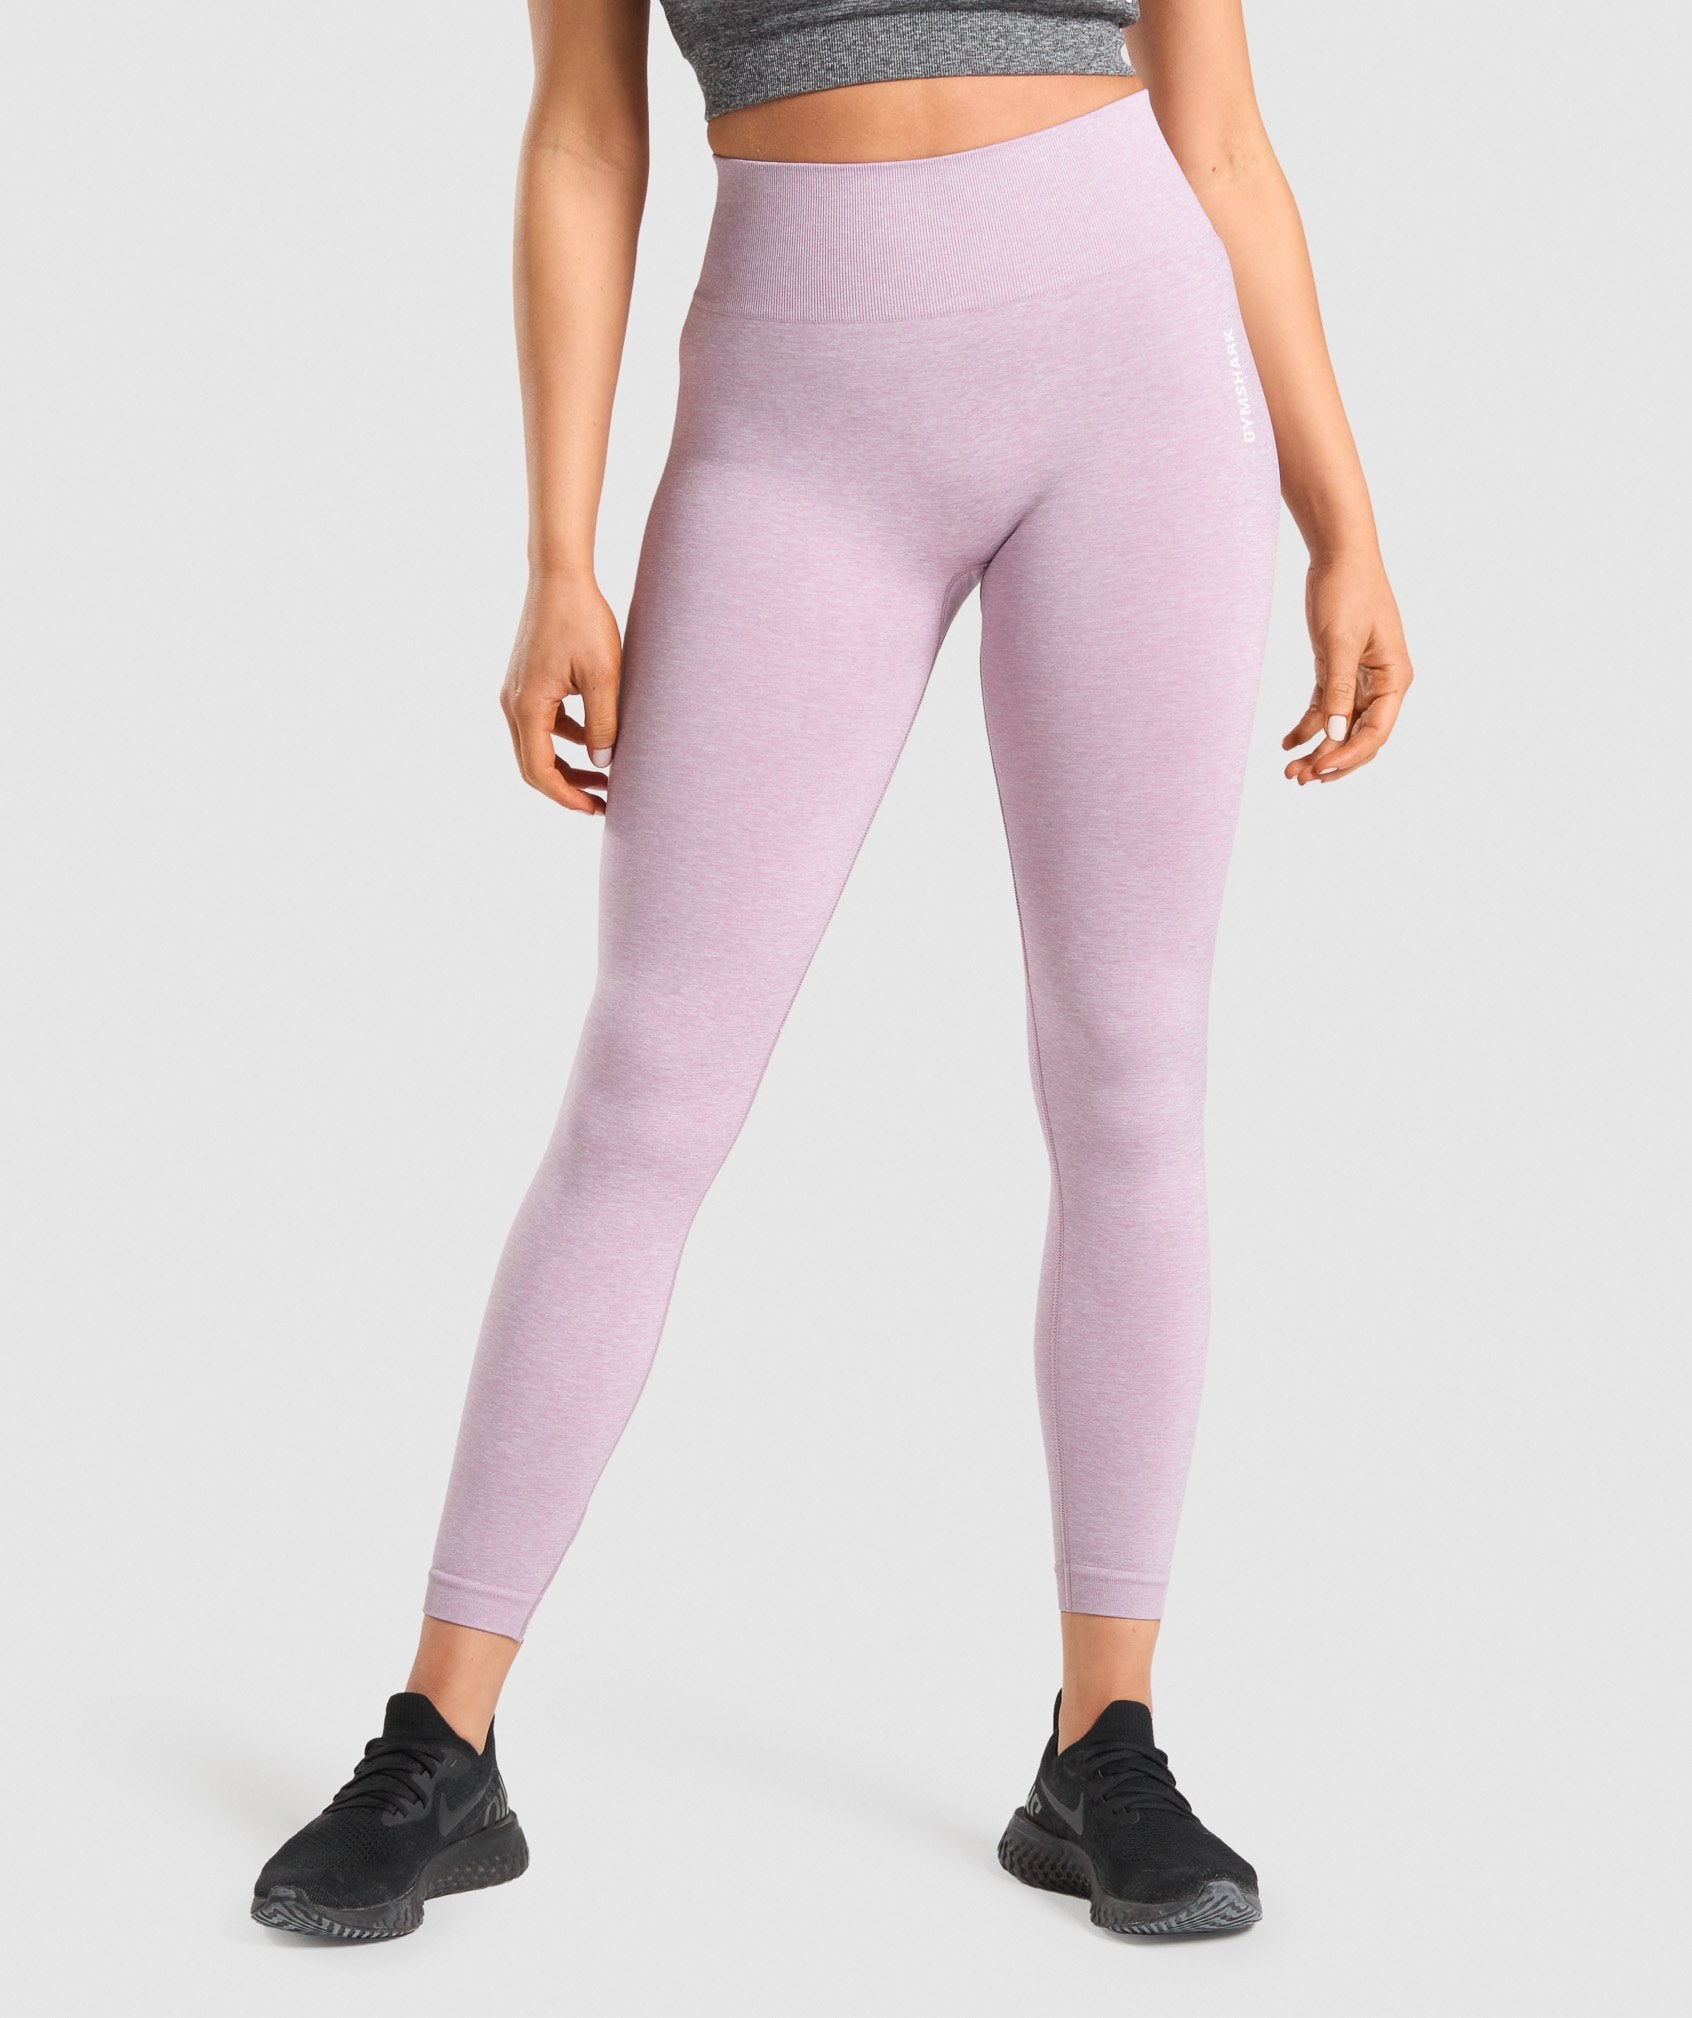 Gymshark Seamless Tights Purple XL  Gym wear for women, Athletic outfits,  Workout clothes